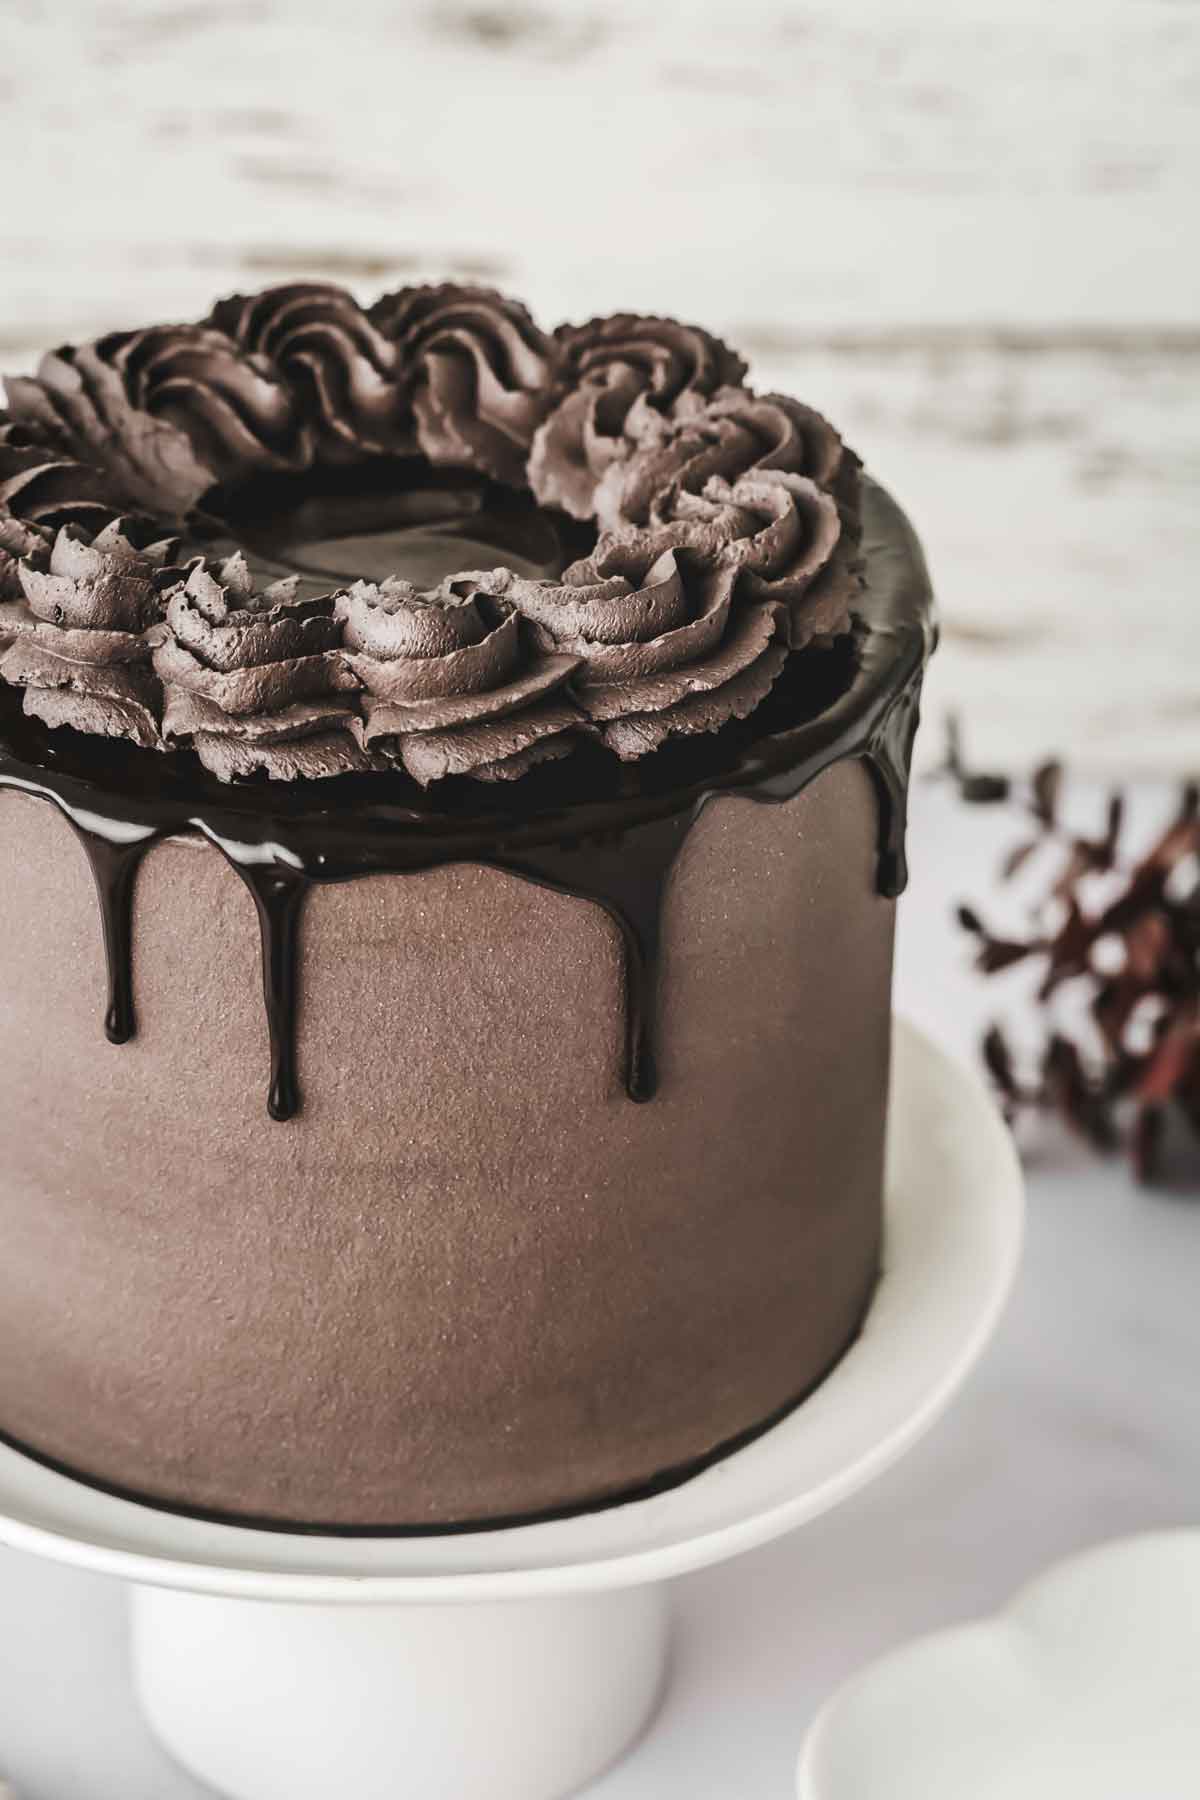 black coco cake on a cake stand